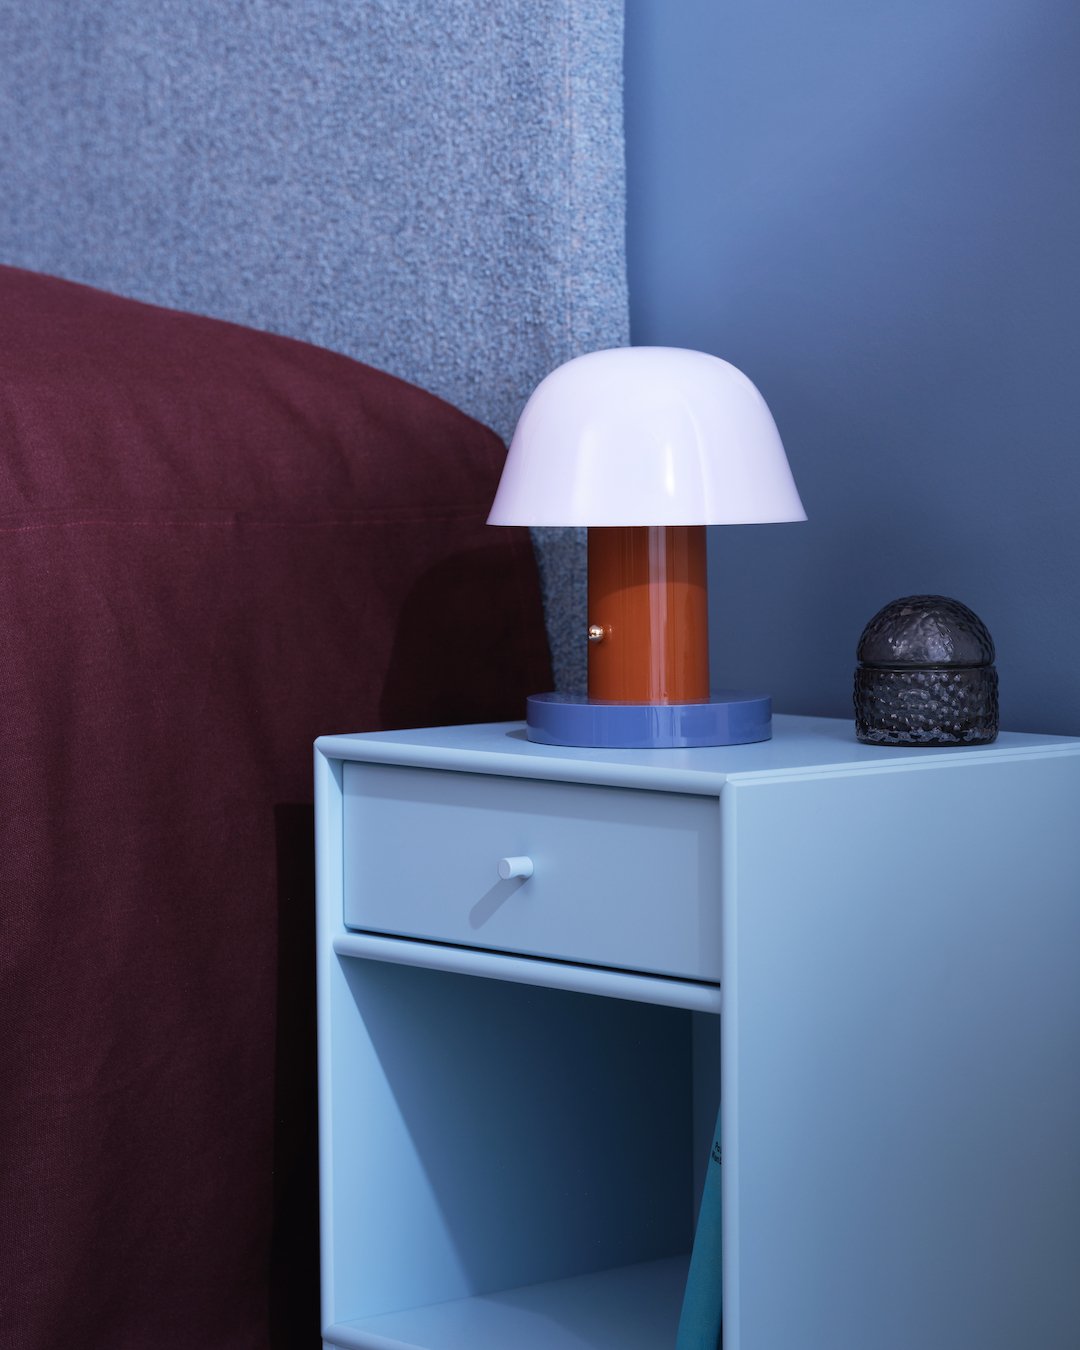 Blue on blue on blue

 Details of the bedside at my latest project for @coppermakersquare. The cute dimmable @andtradition lamps are chargeable and portable so you can move them around your space. 

Shot by @bethanycrutchfield

#InteriorDesign #Bedsi